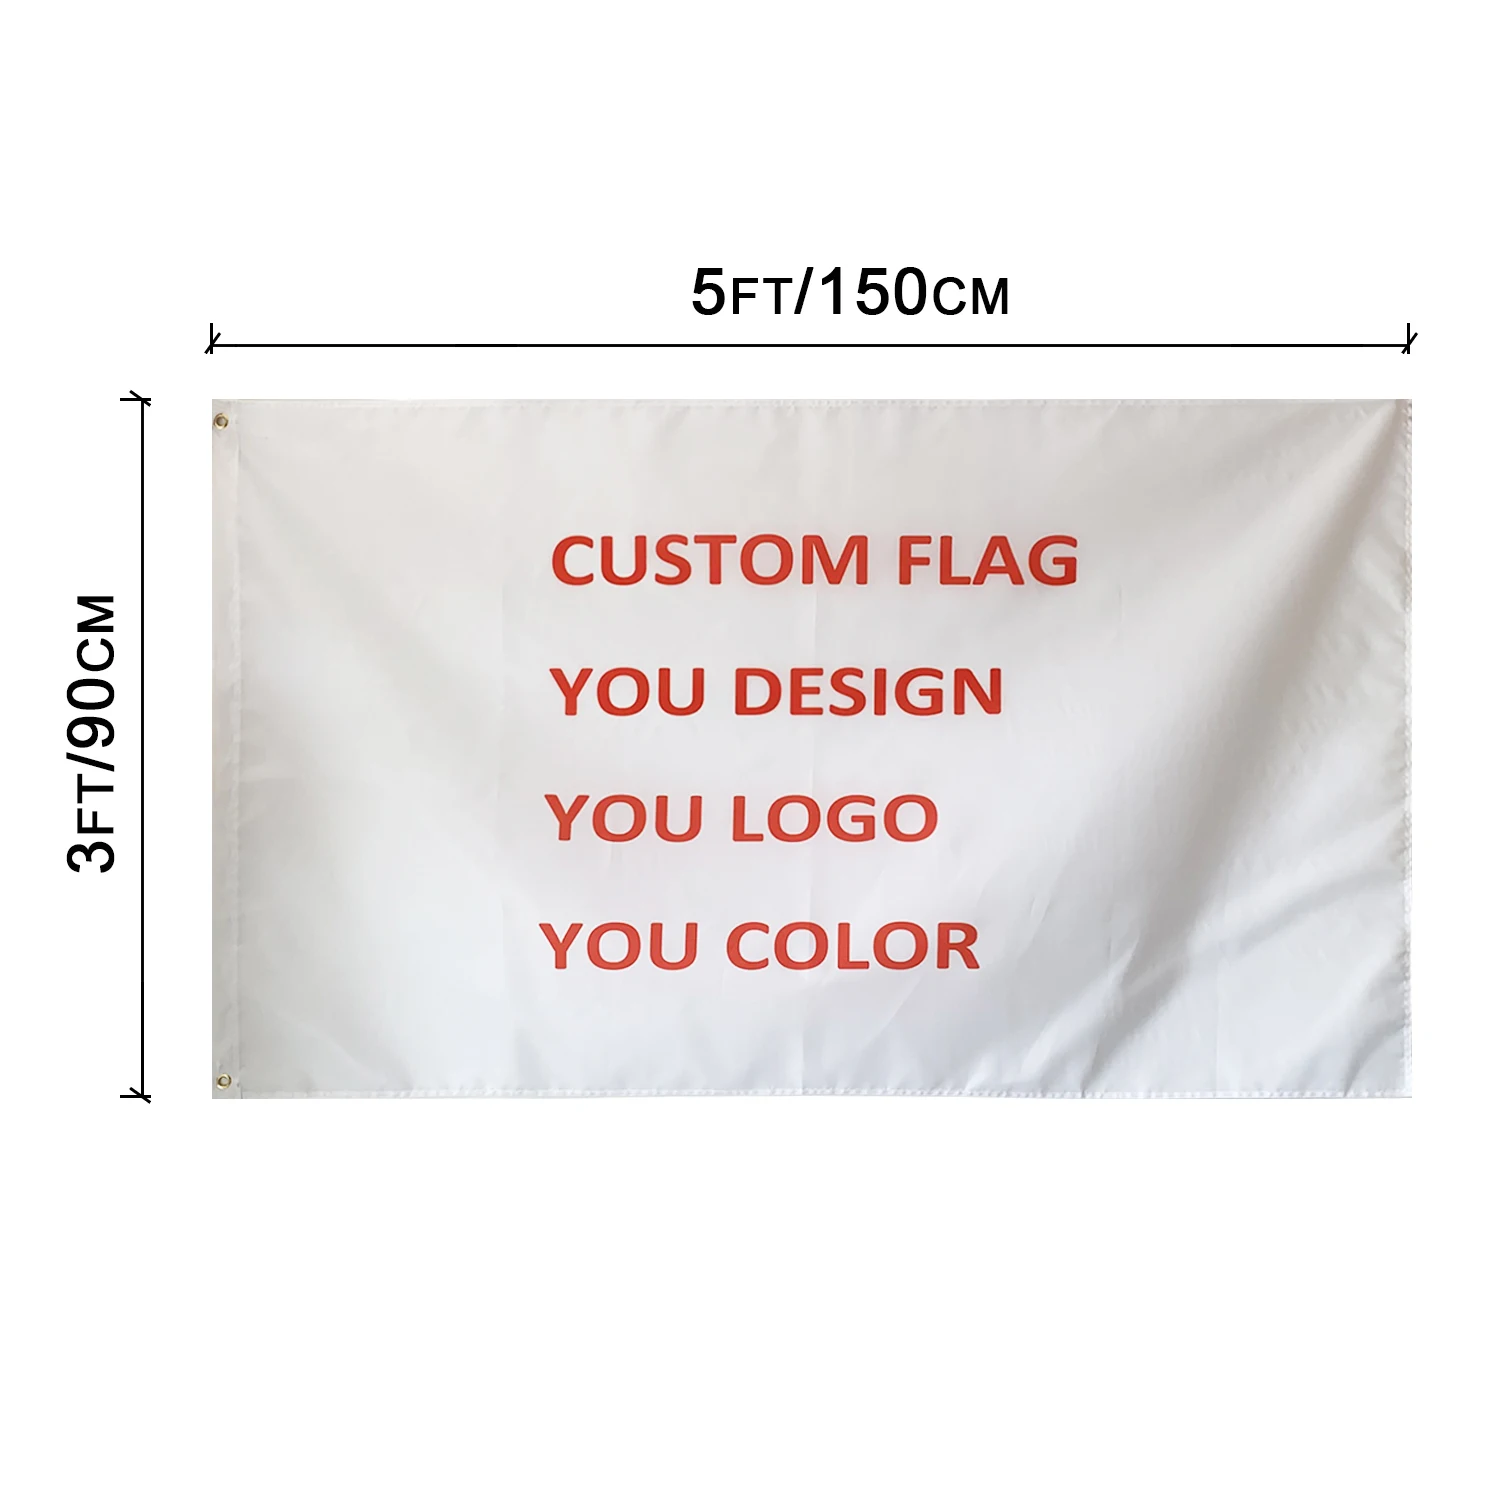 
China factories wholesale 3x5ft large national flag outdoor all country custom design cheap price flags  (62395426142)